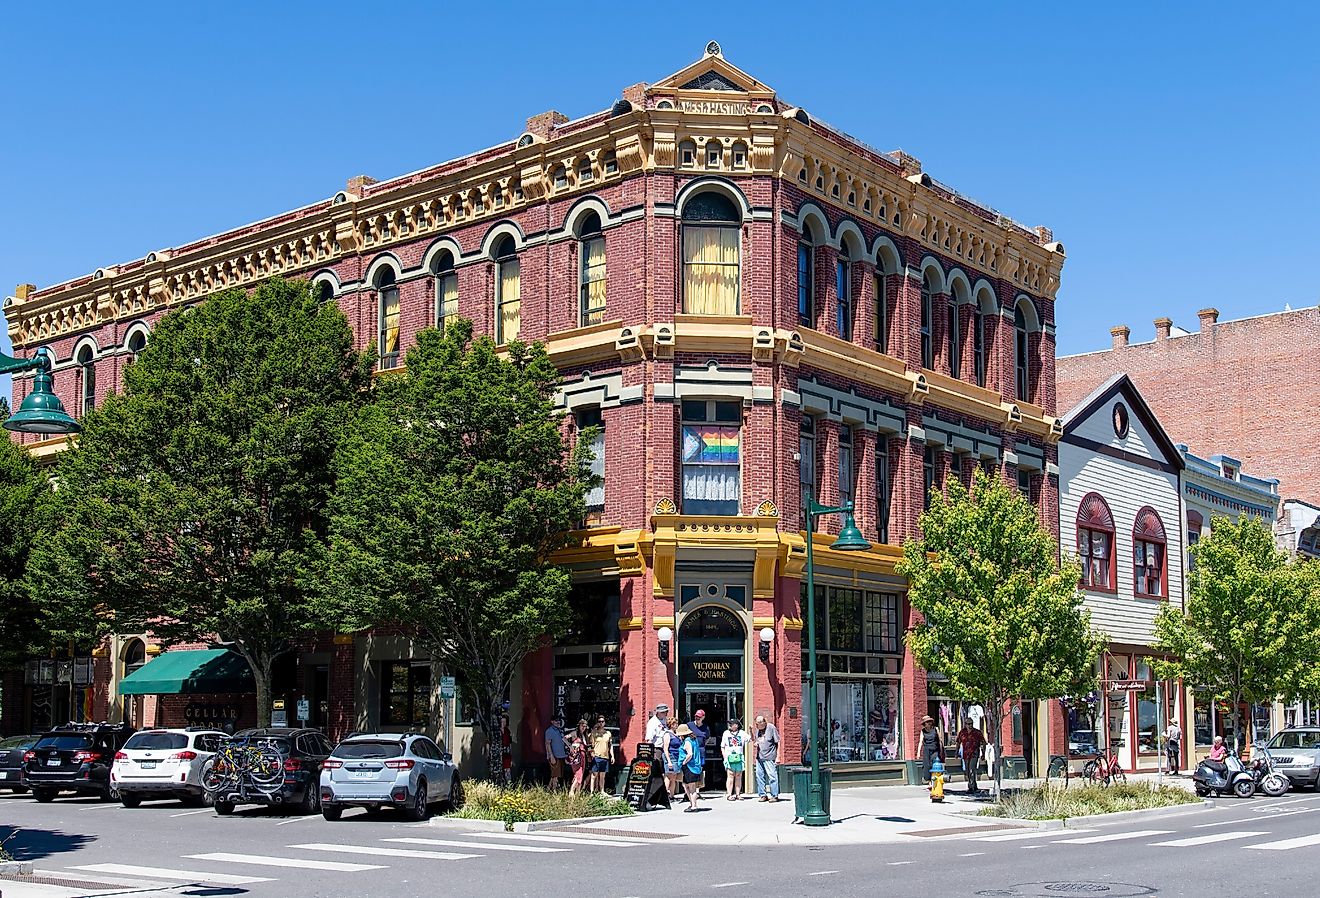 Downtown Water Street in Port Townsend Historic District, Washington. Image credit 365 Focus Photography via Shutterstock